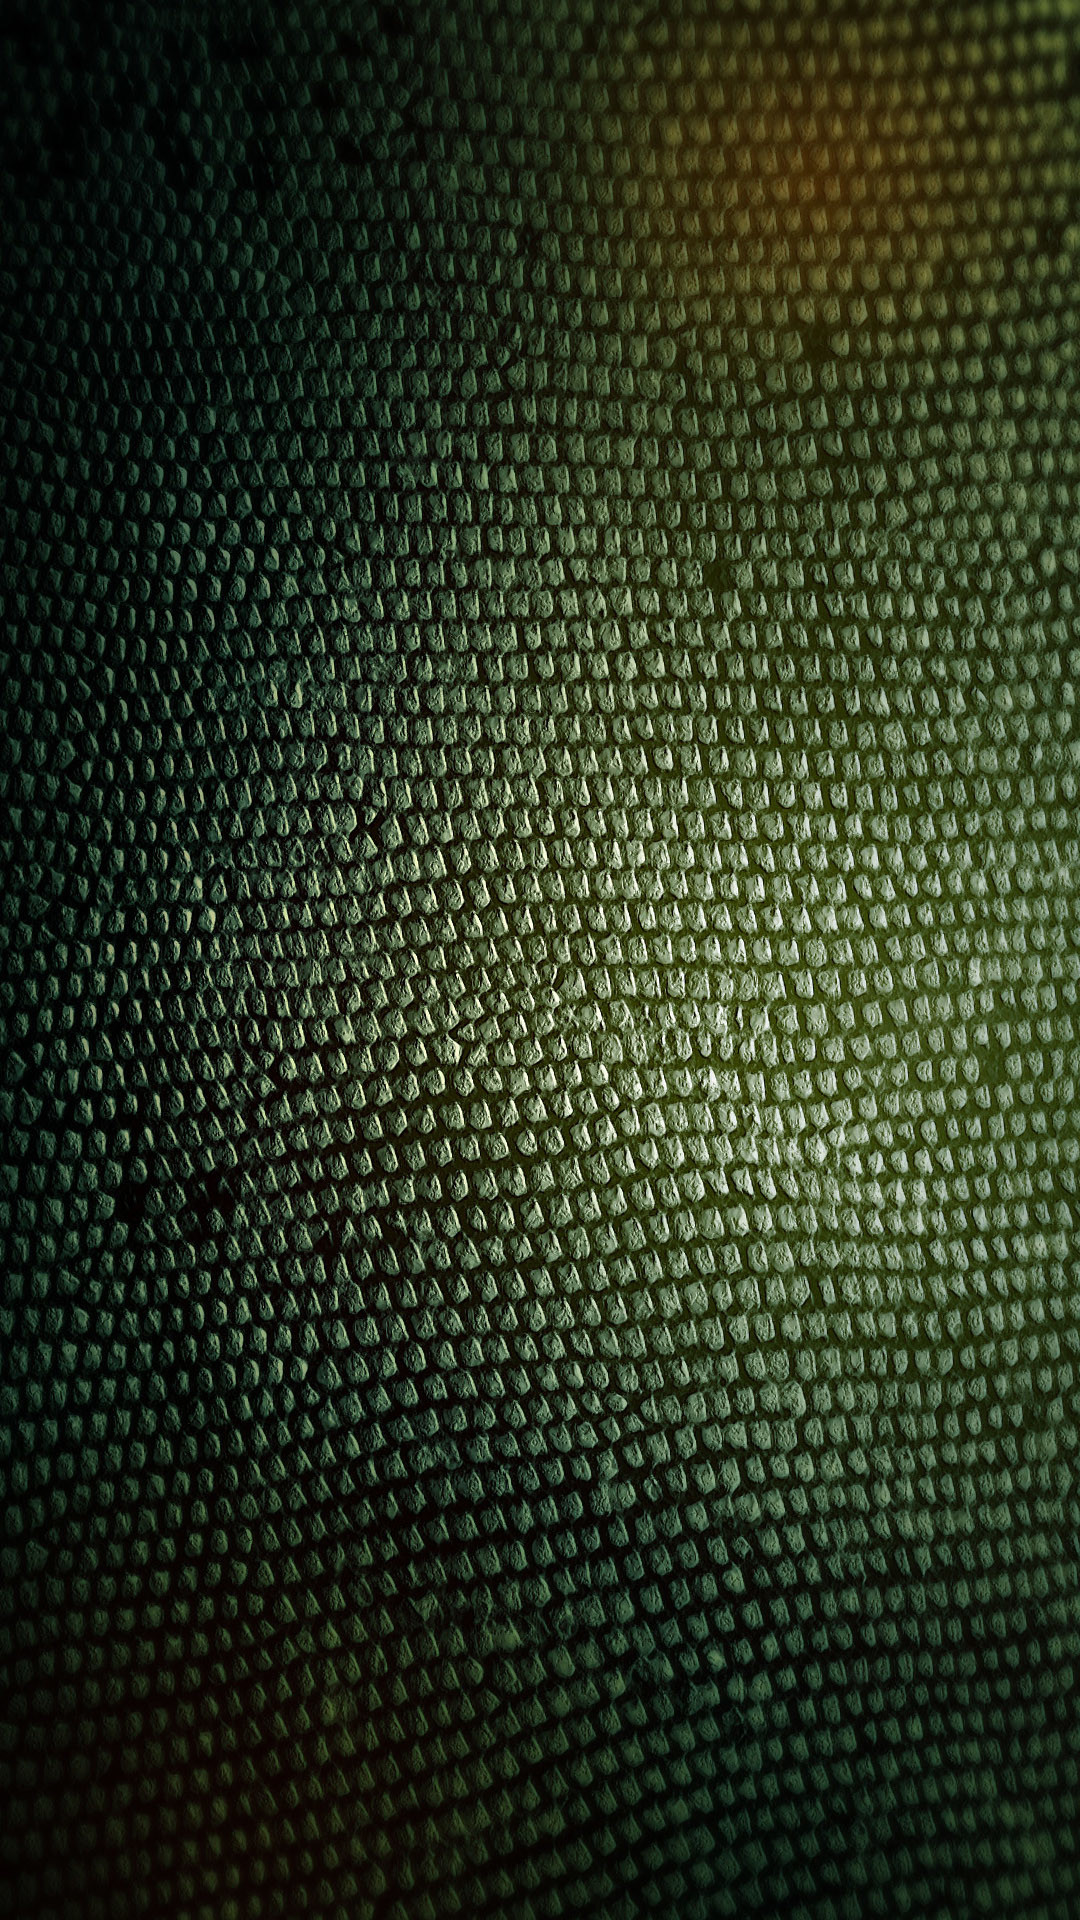 1080x1920 Meizu MX5 Wallpaper: Snakeskin Mobile Android Wallpapers